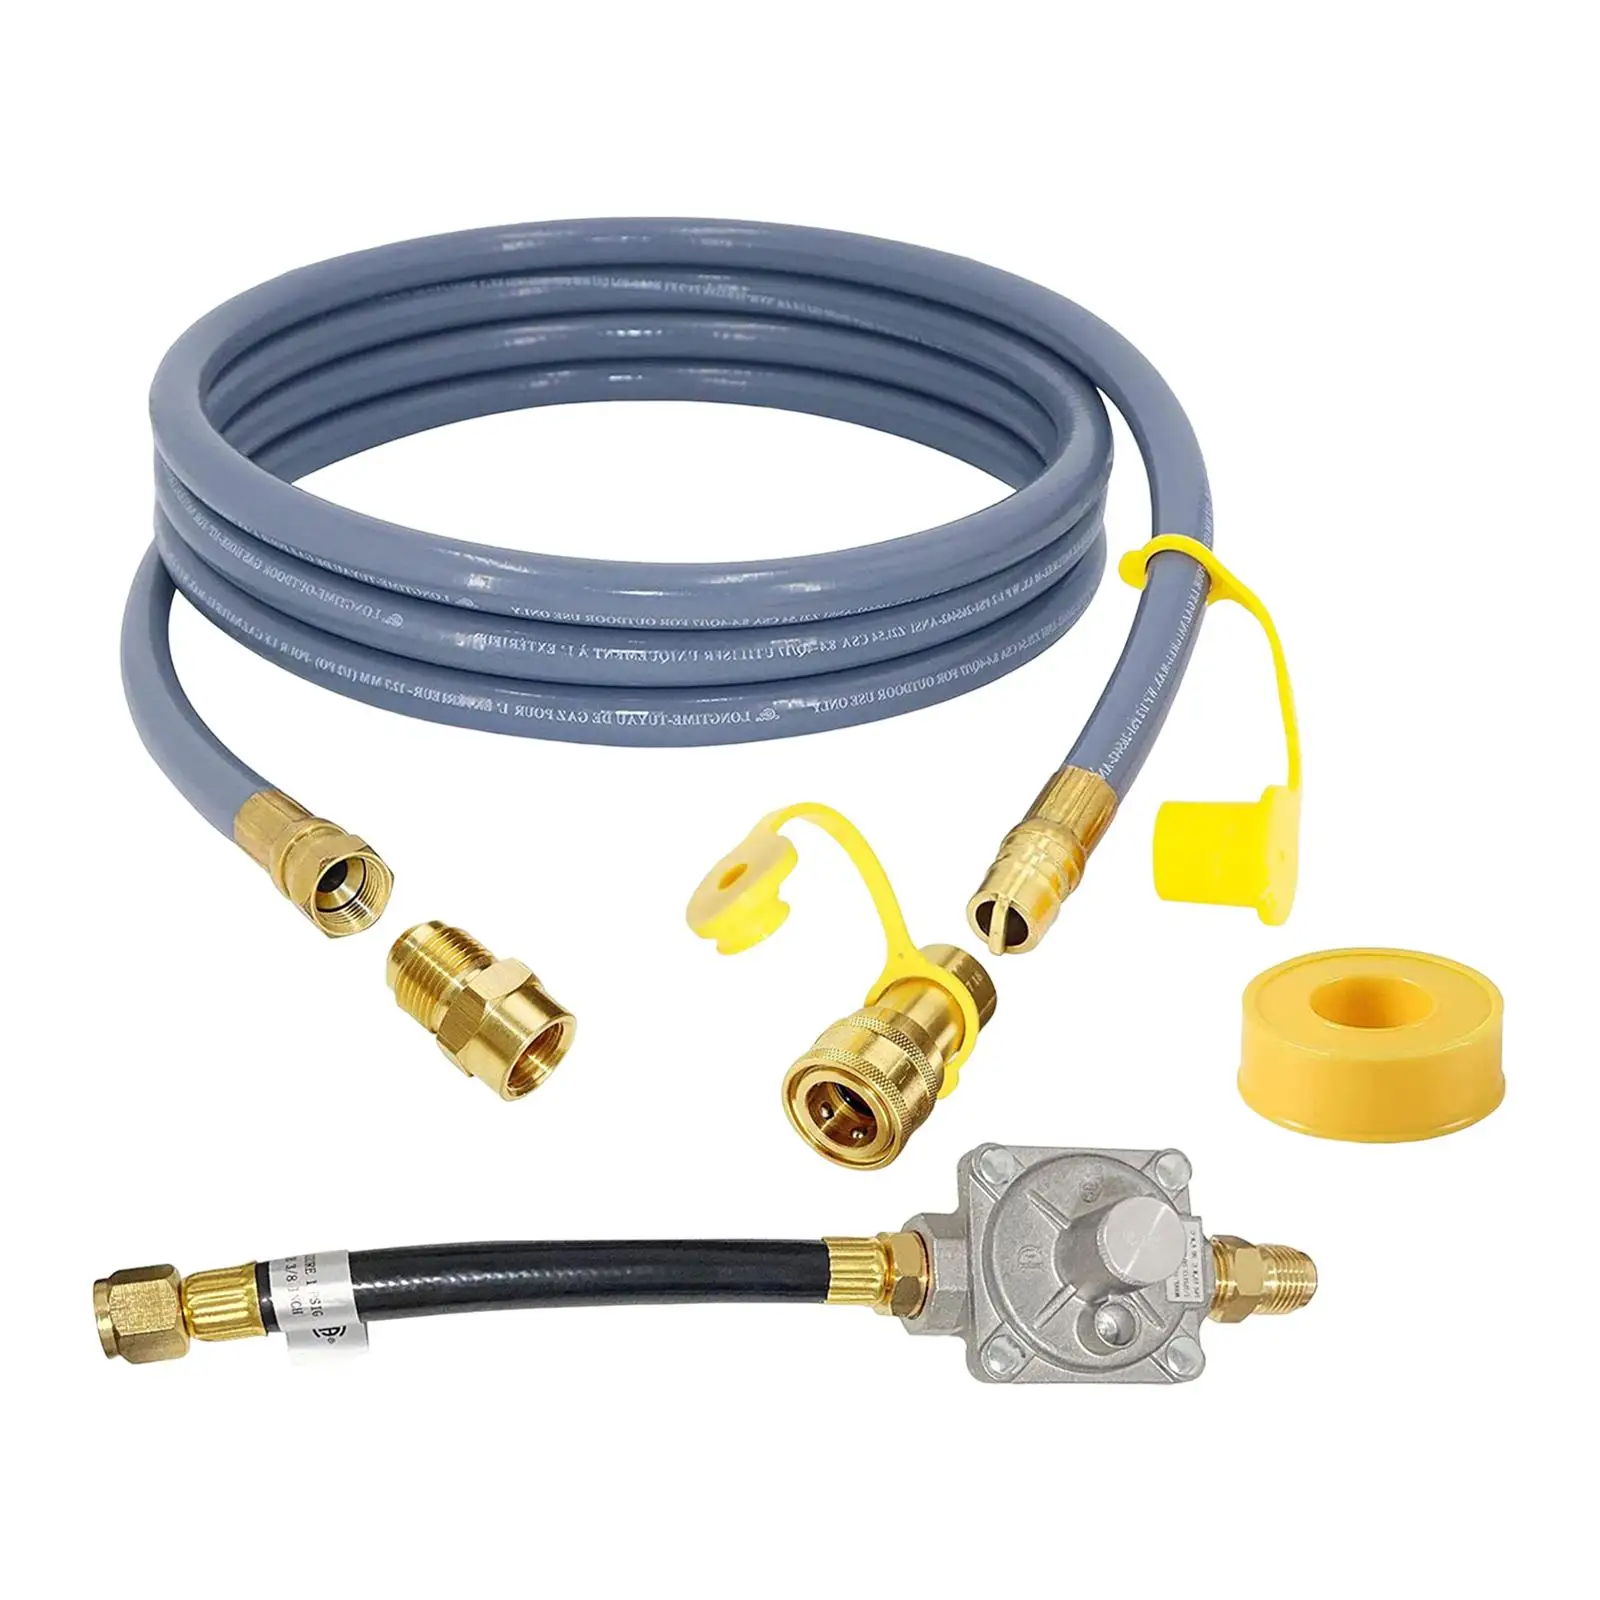 3Meter 1/2 Gas Hose with Quick Connect Fitting, Propane to Natural Gas Conversion Kit for Patio Heater, Grill, Fire Pit, BBQ